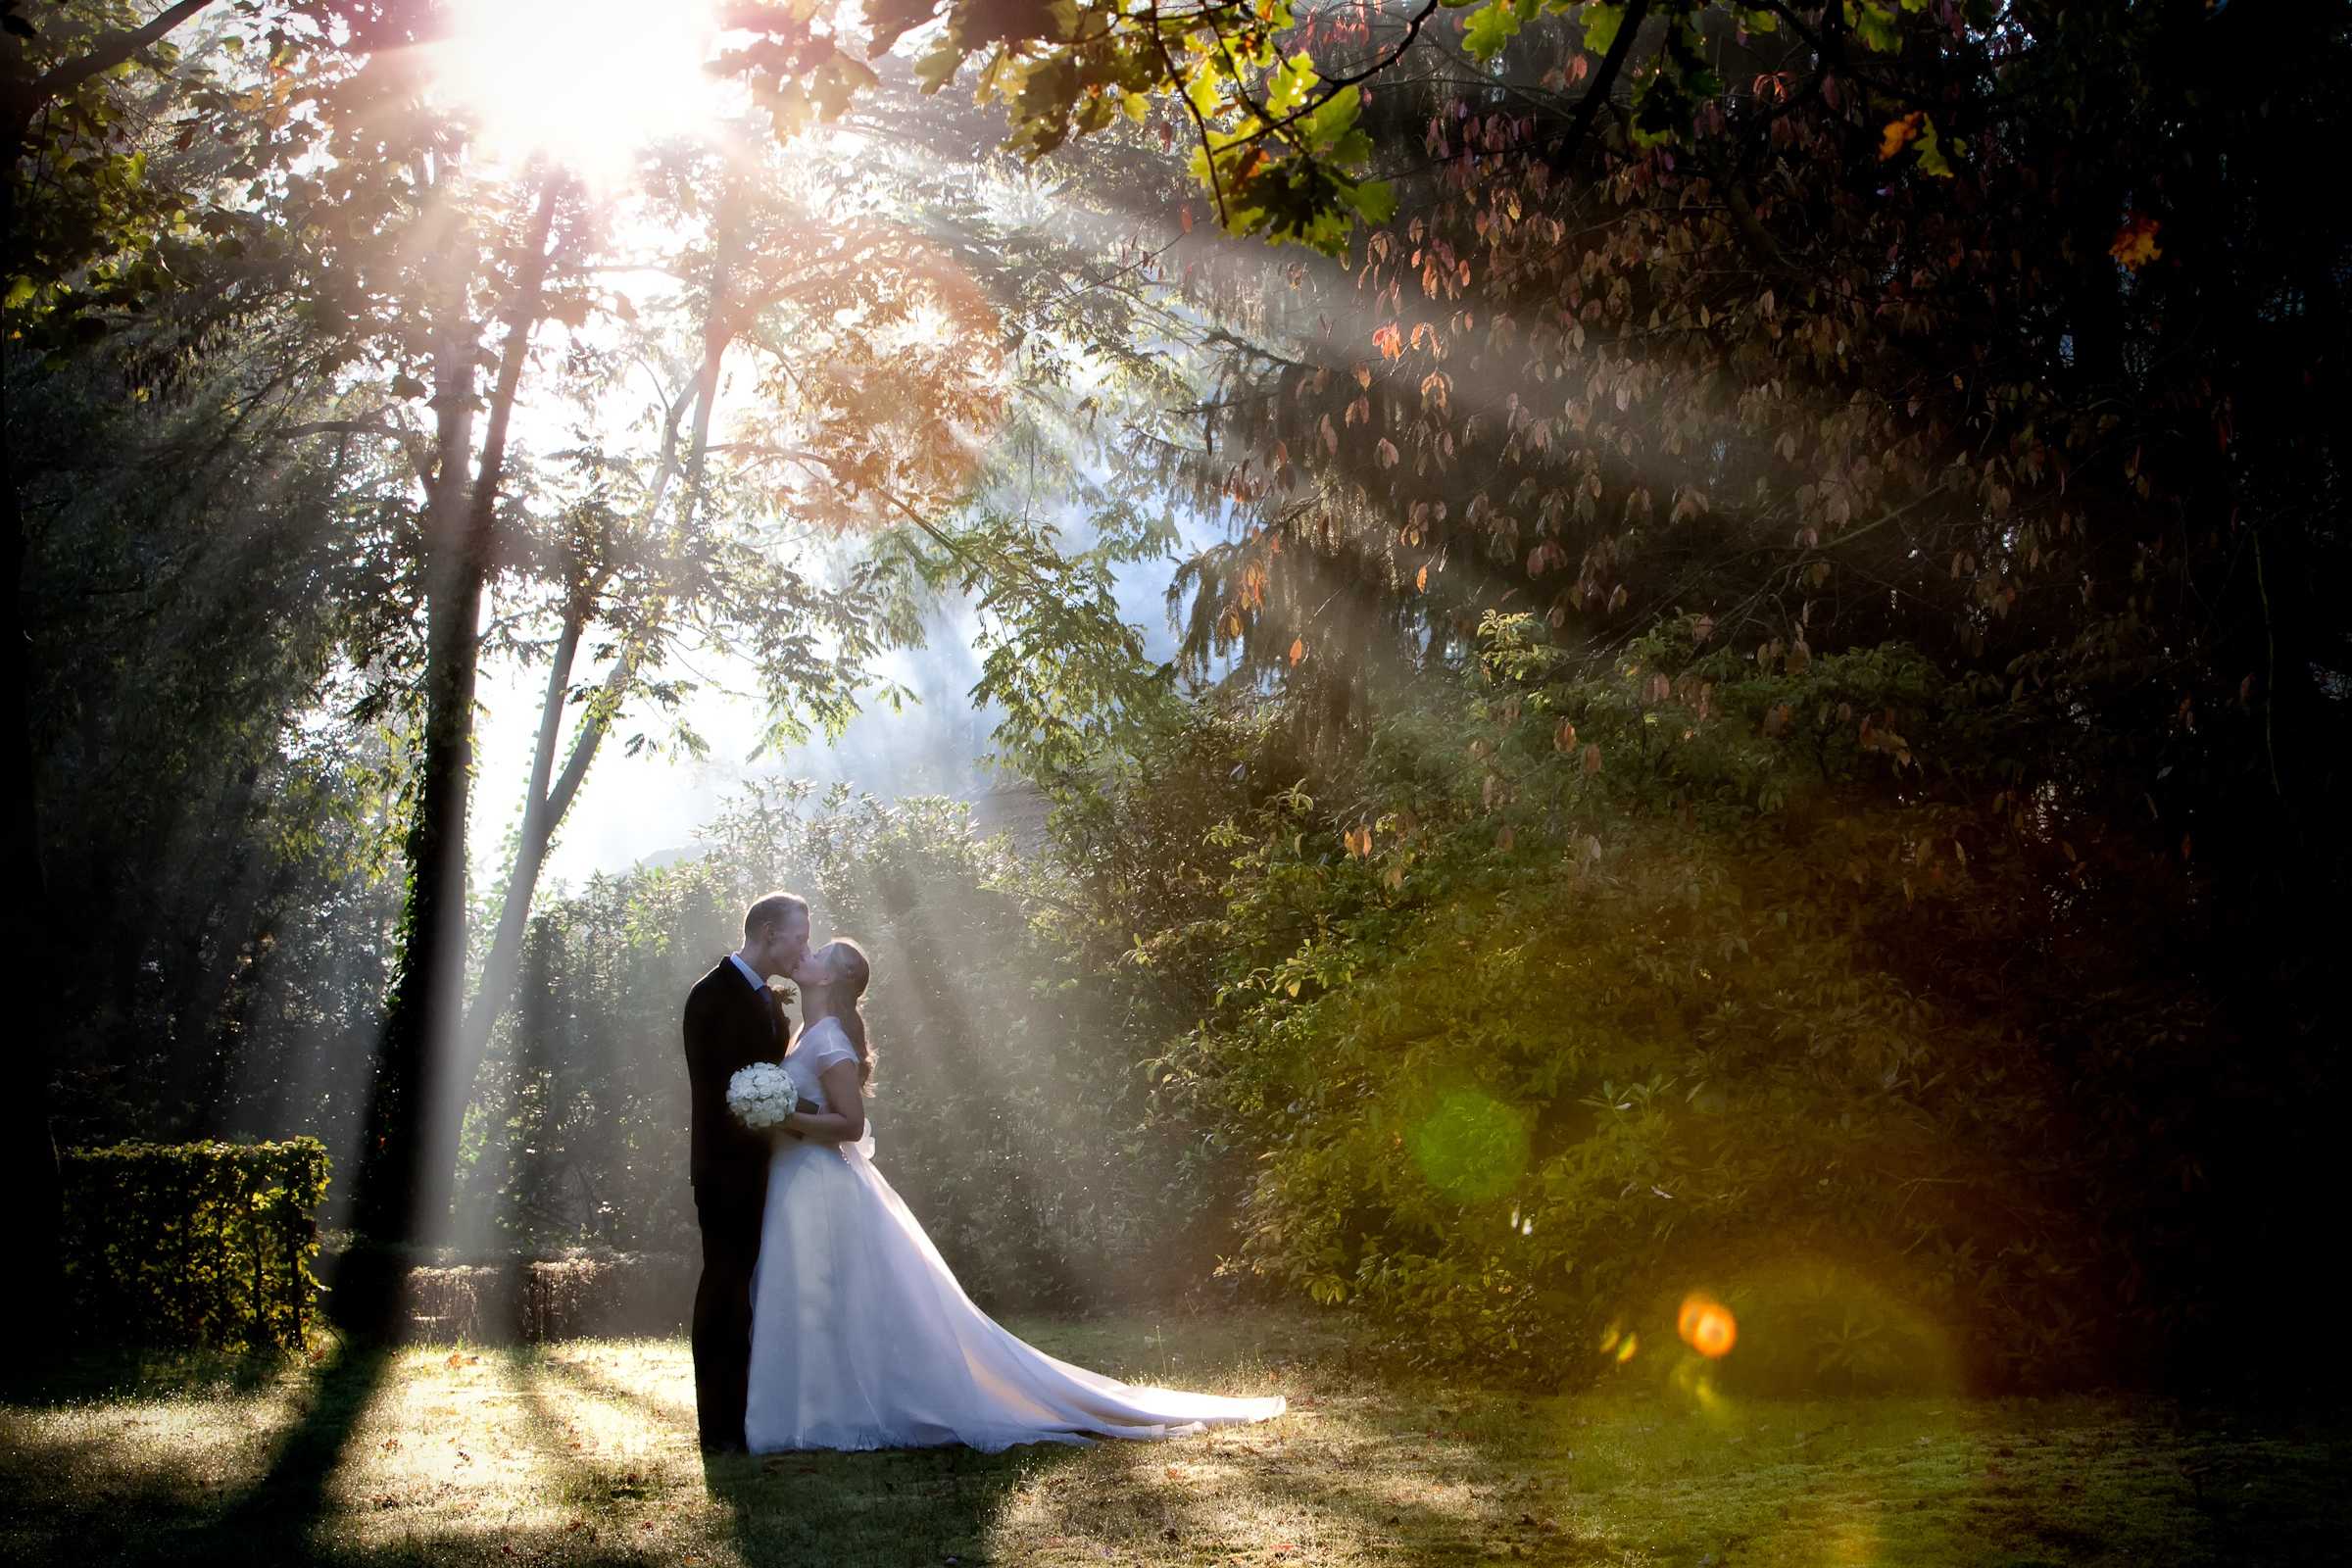 Tying the knot under the rays of the sun - Wedding Photography http://fotografieLuna.be